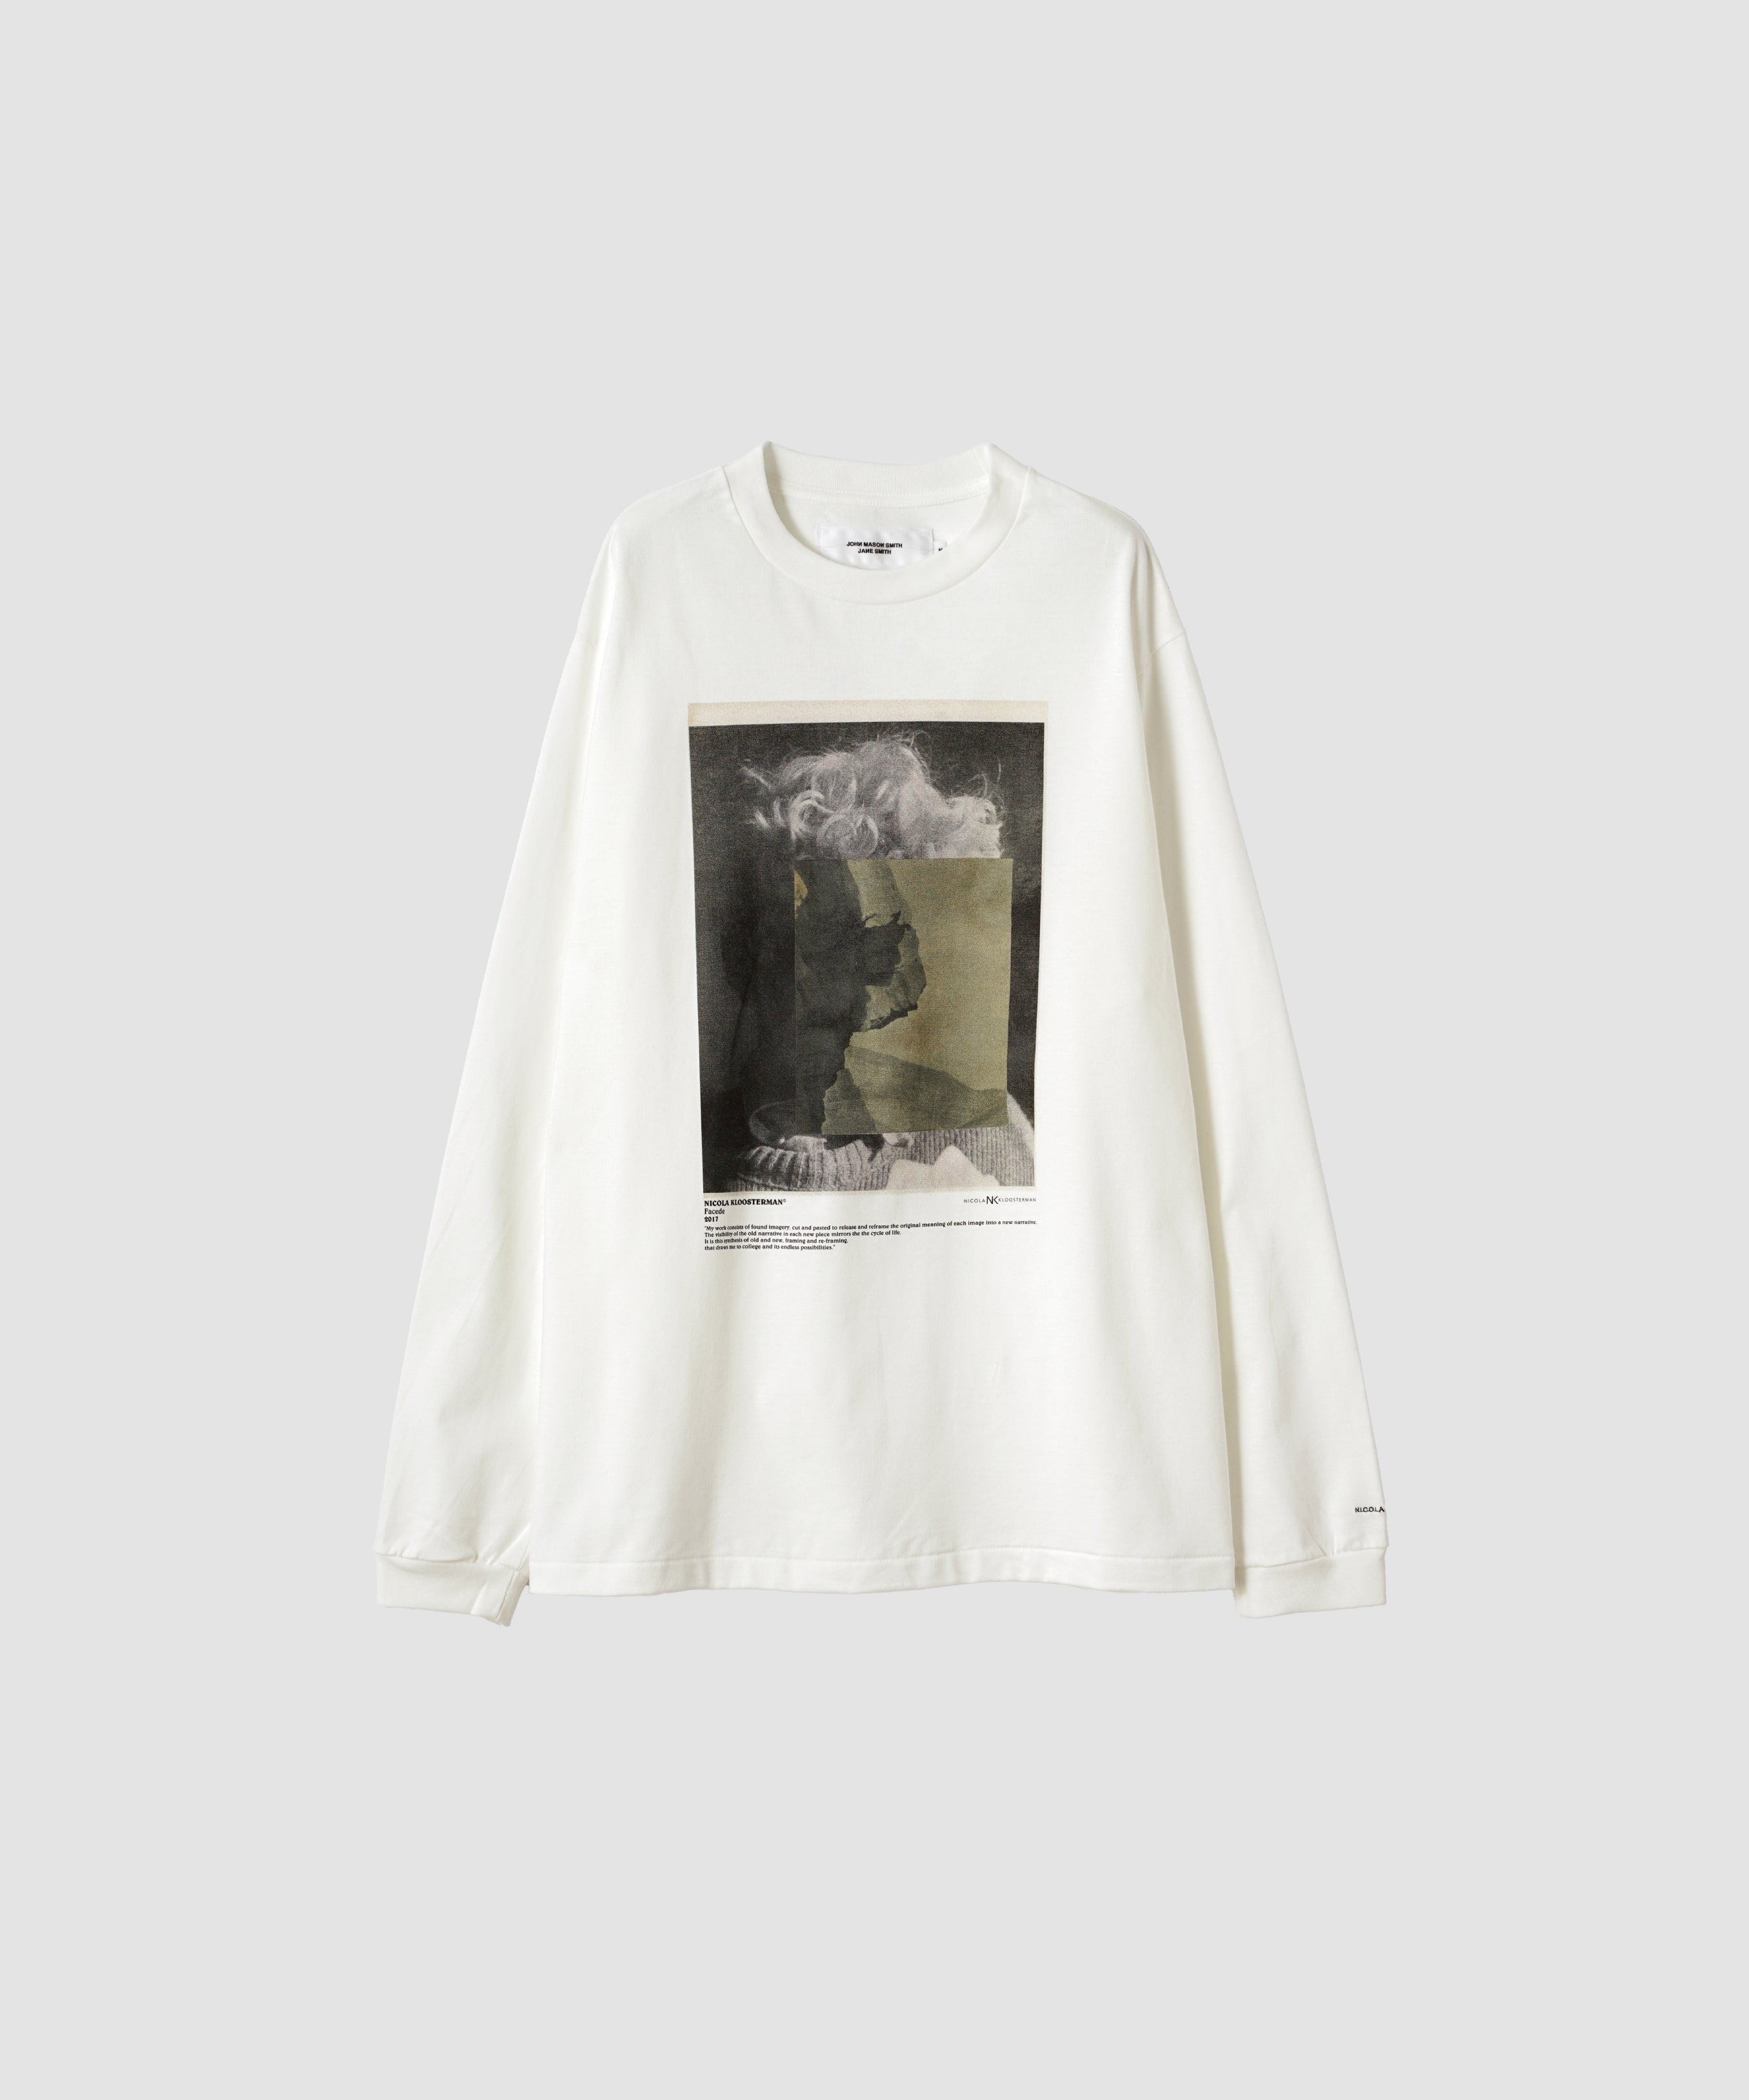 NICOLA KLOOSTERMAN FACED L/S T-SHIRT